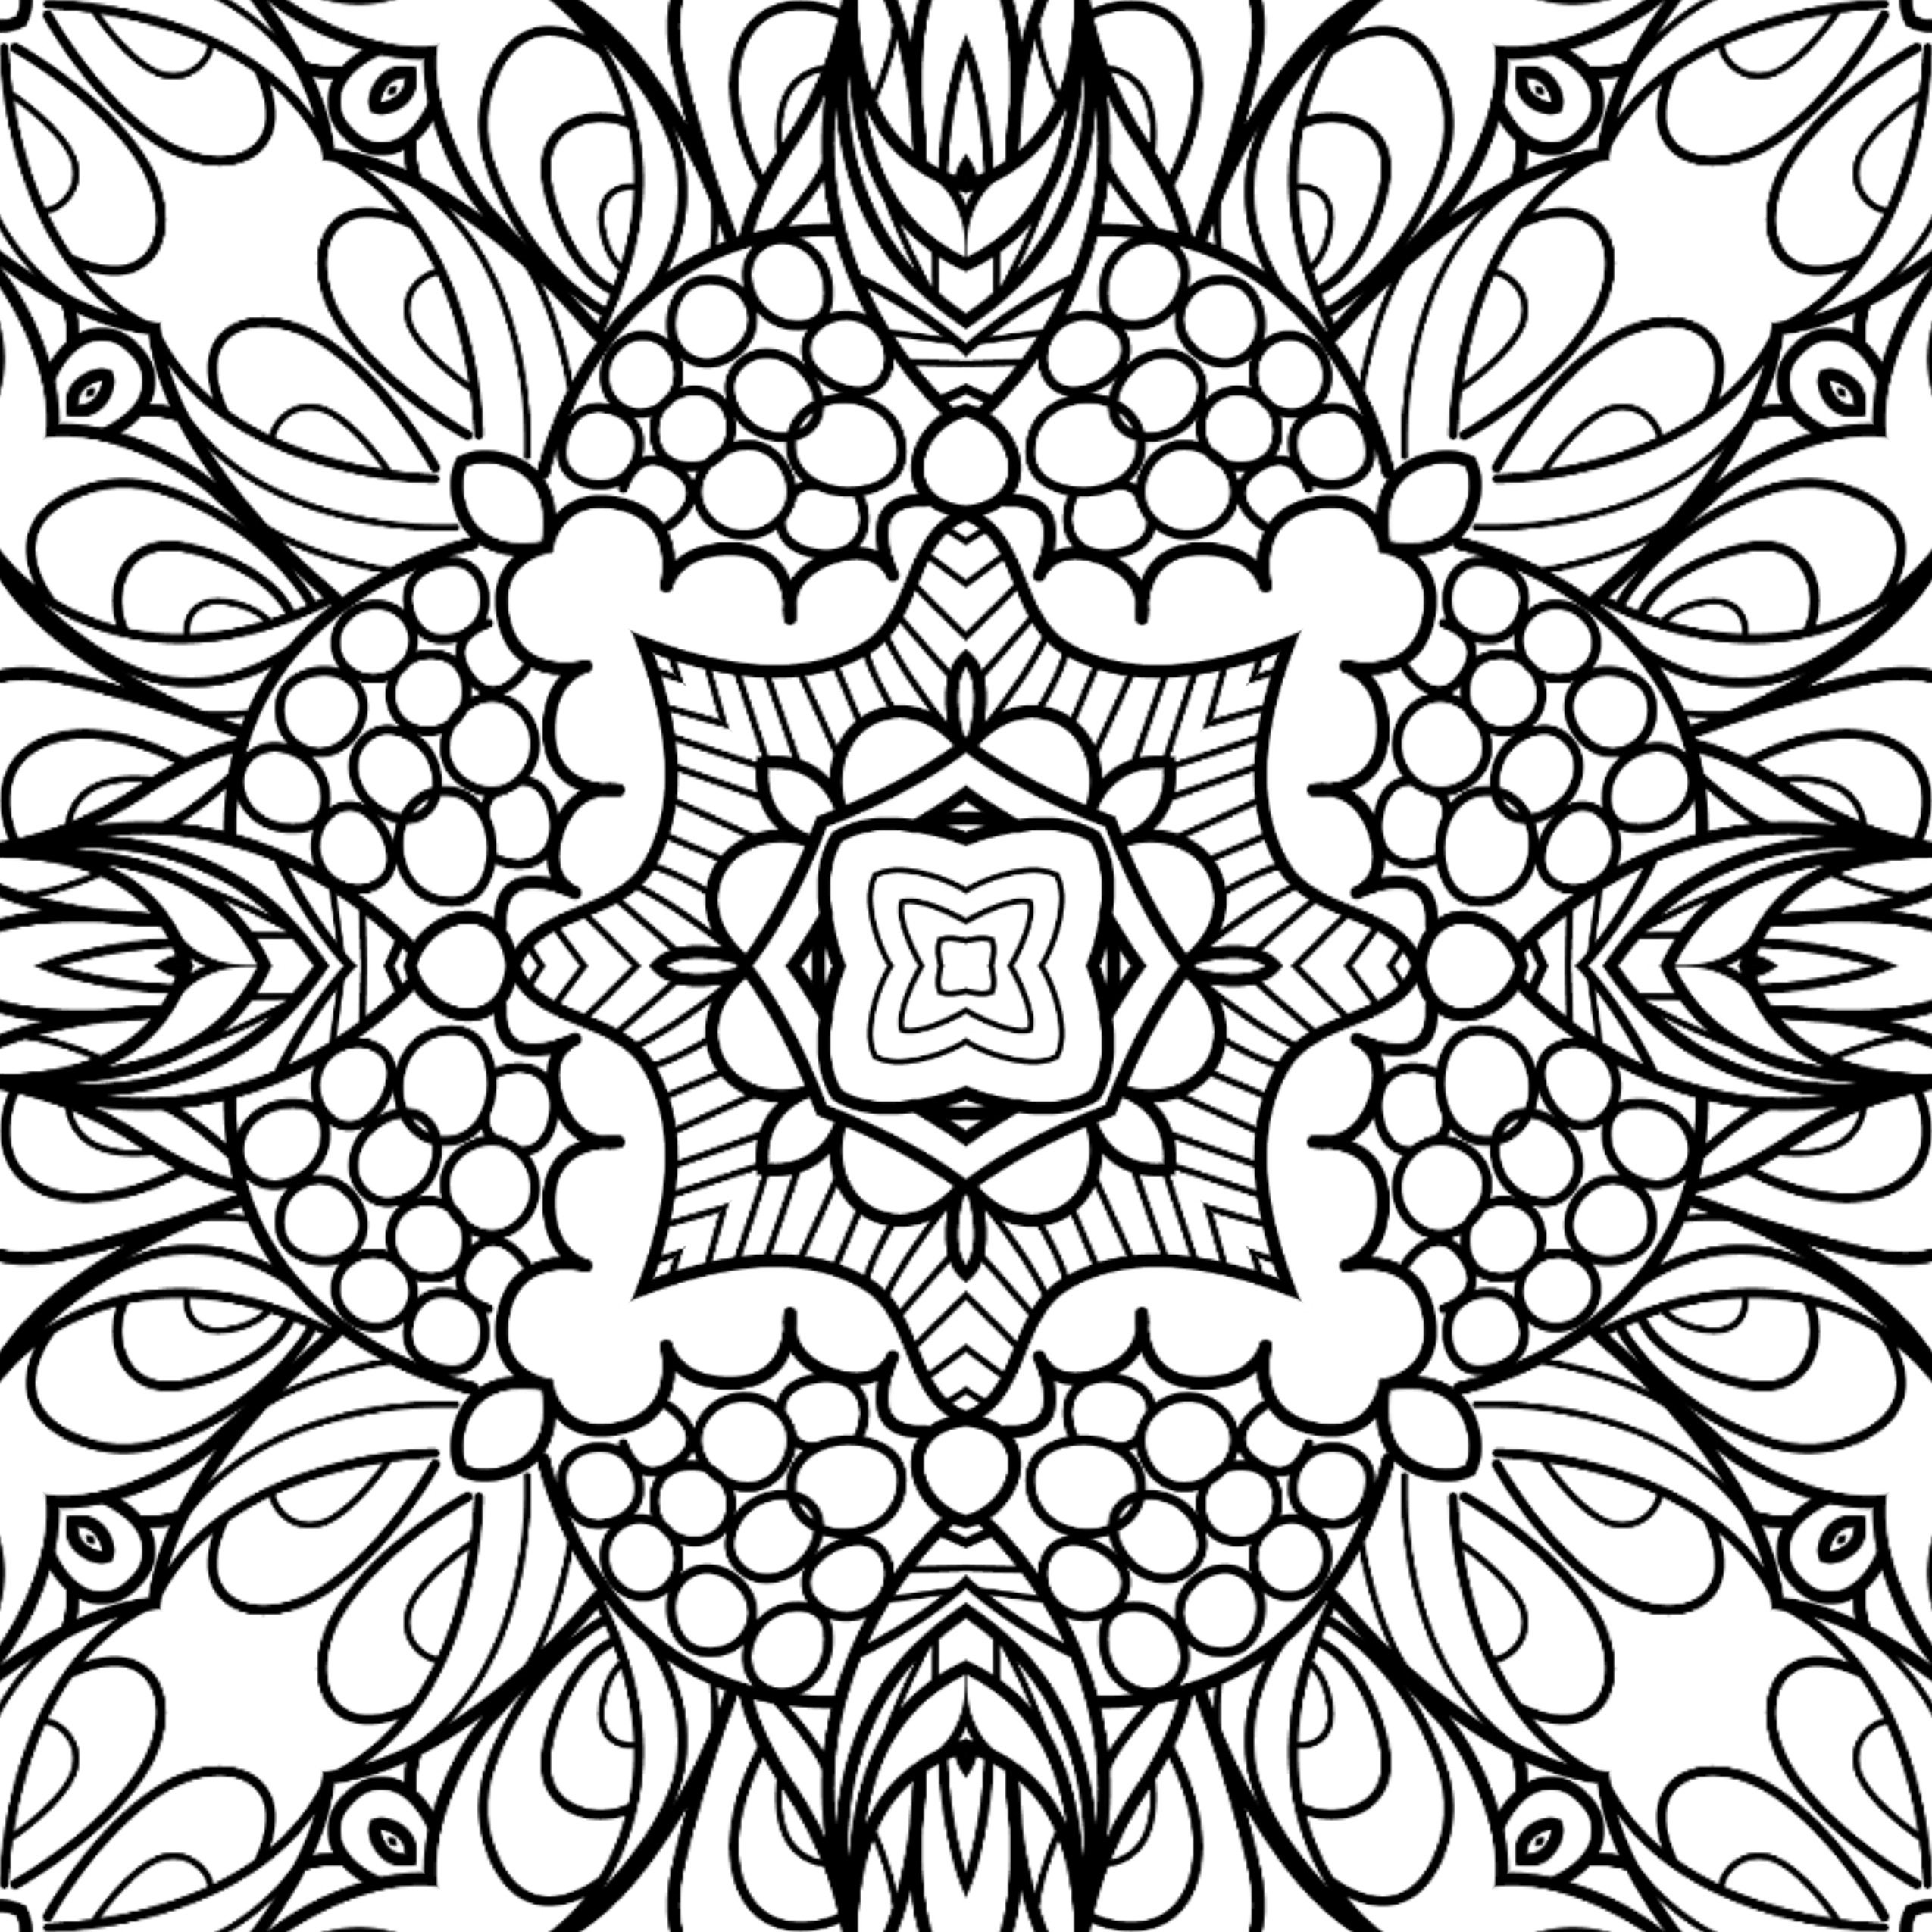 Adult Coloring Book Mandalas with Reduced Lines · Creative Fabrica